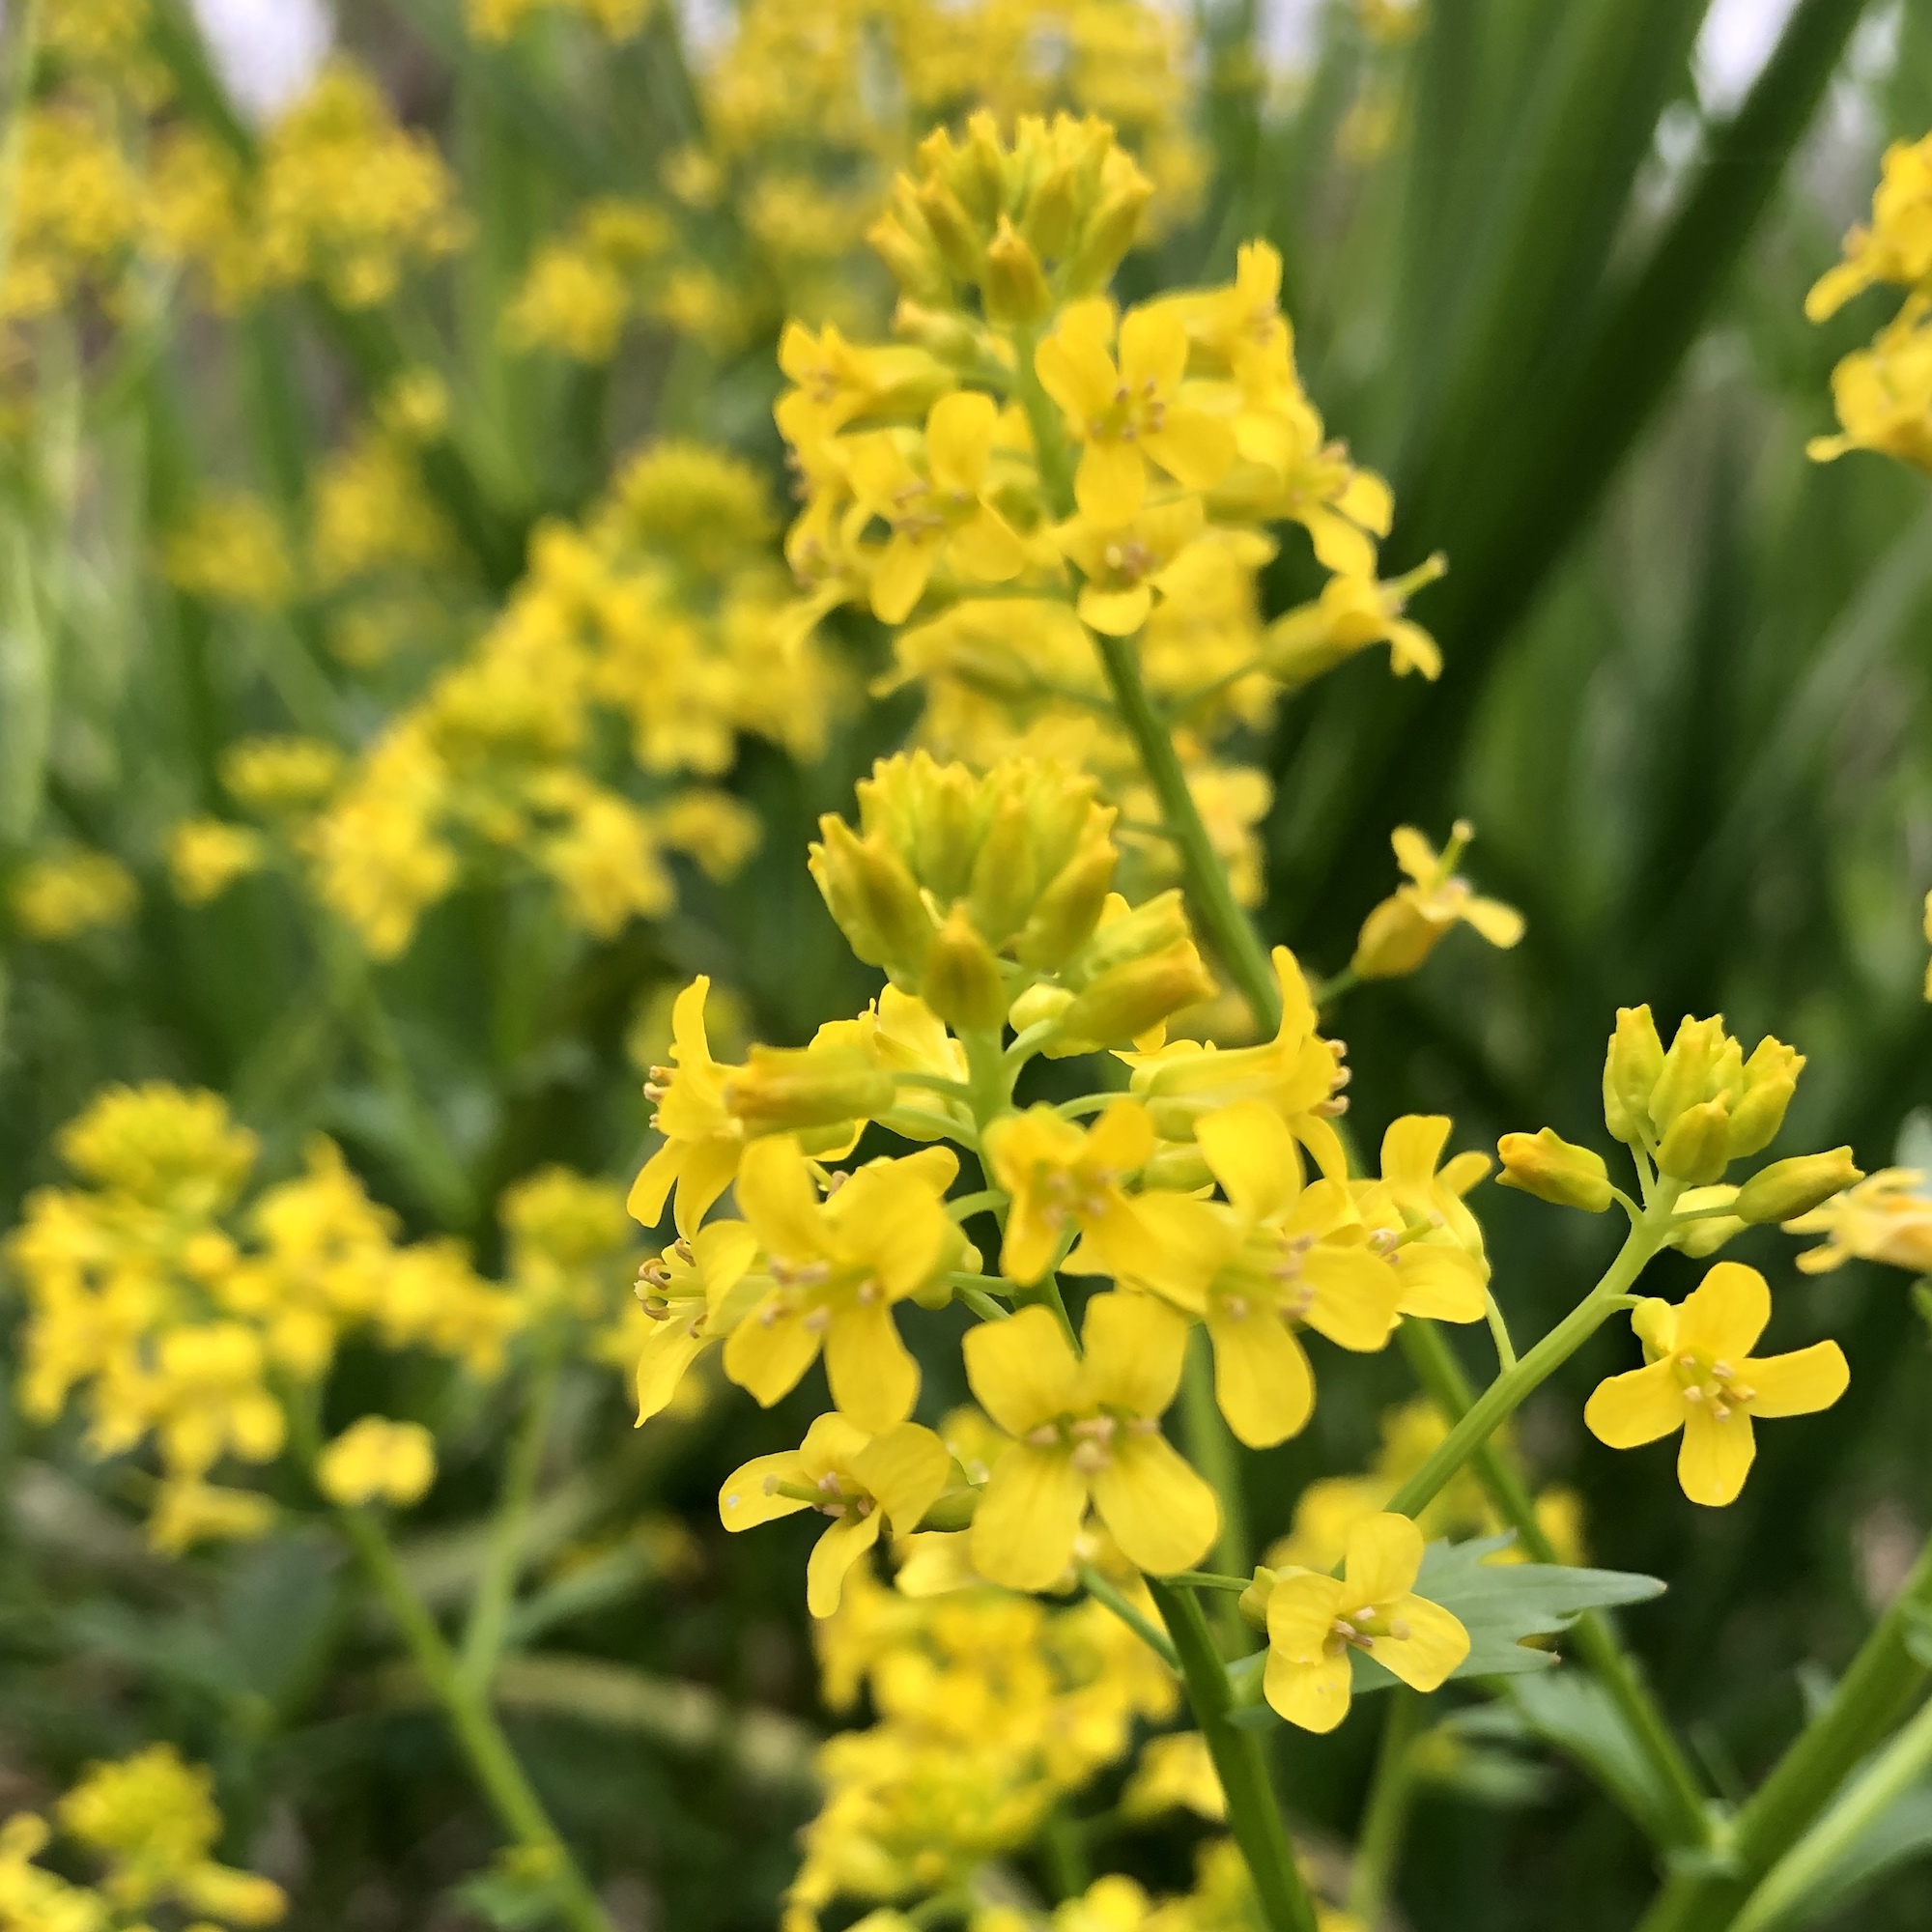 Garden Yellow Rocket by Marion Dunn Pond on May 17, 2019.